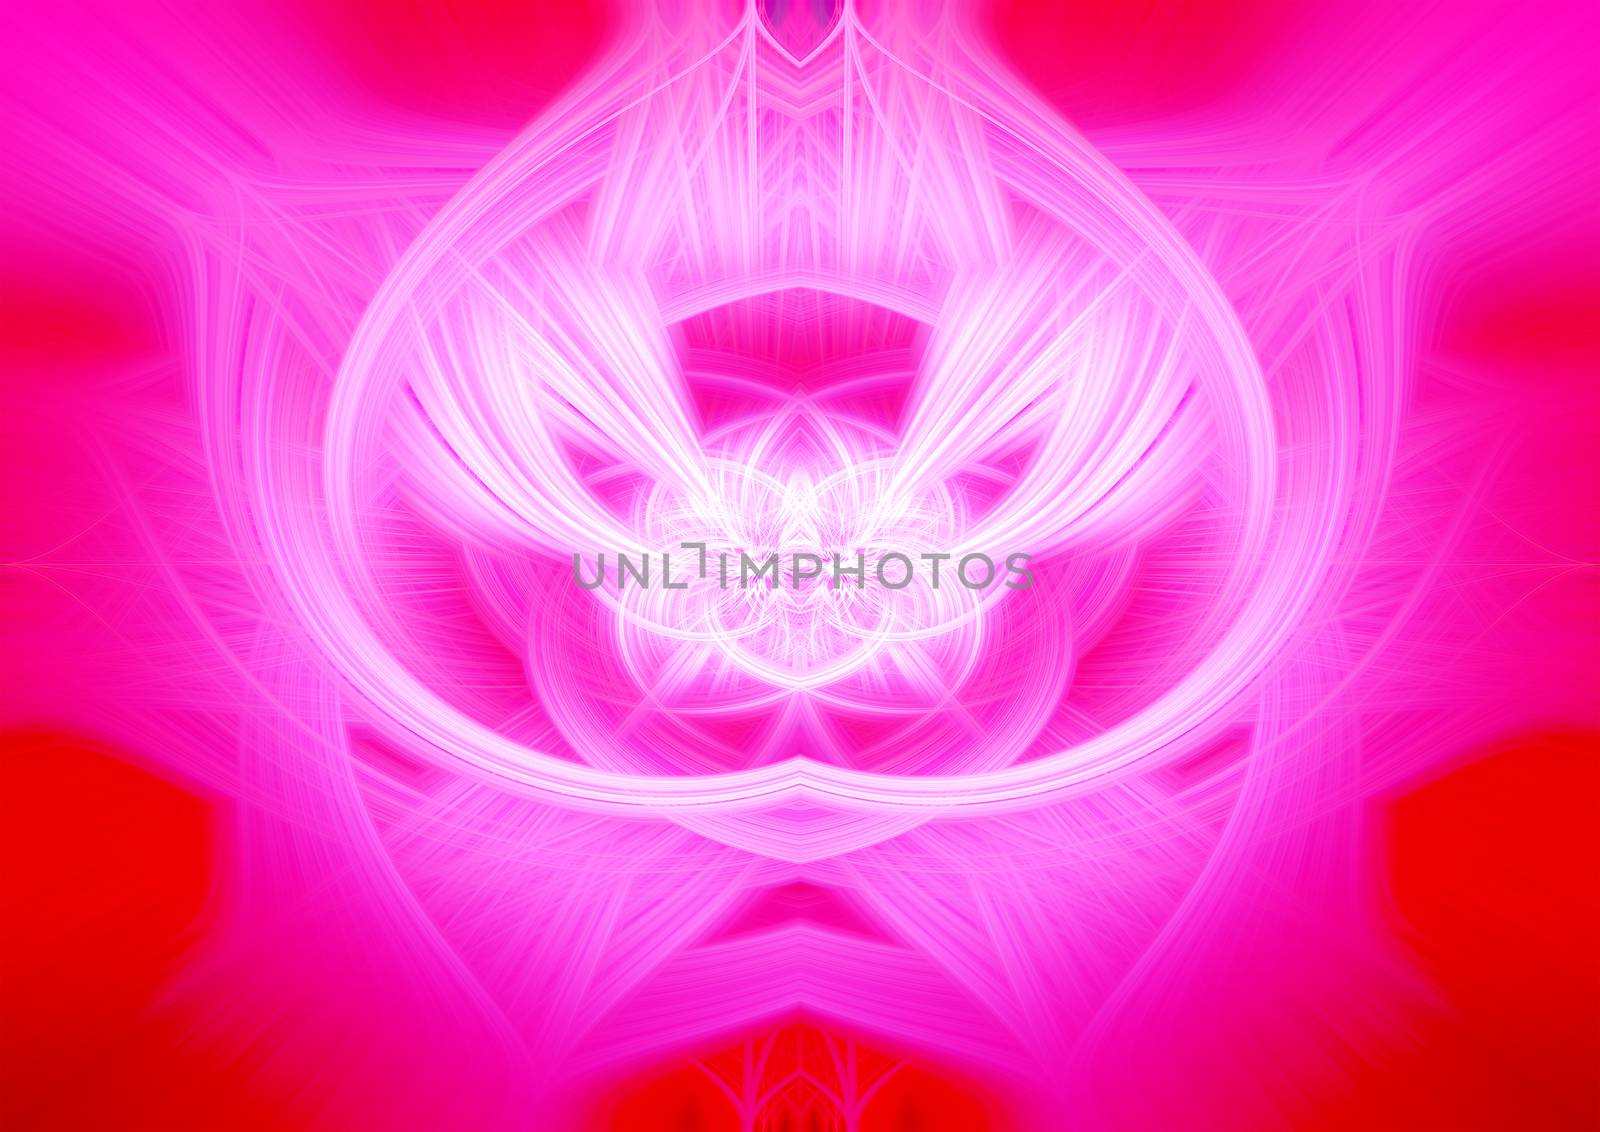 Beautiful abstract intertwined glowing 3d fibers forming a shape of sparkle, flame, flower, interlinked hearts. Bright red and pink colors. Illustration by DamantisZ